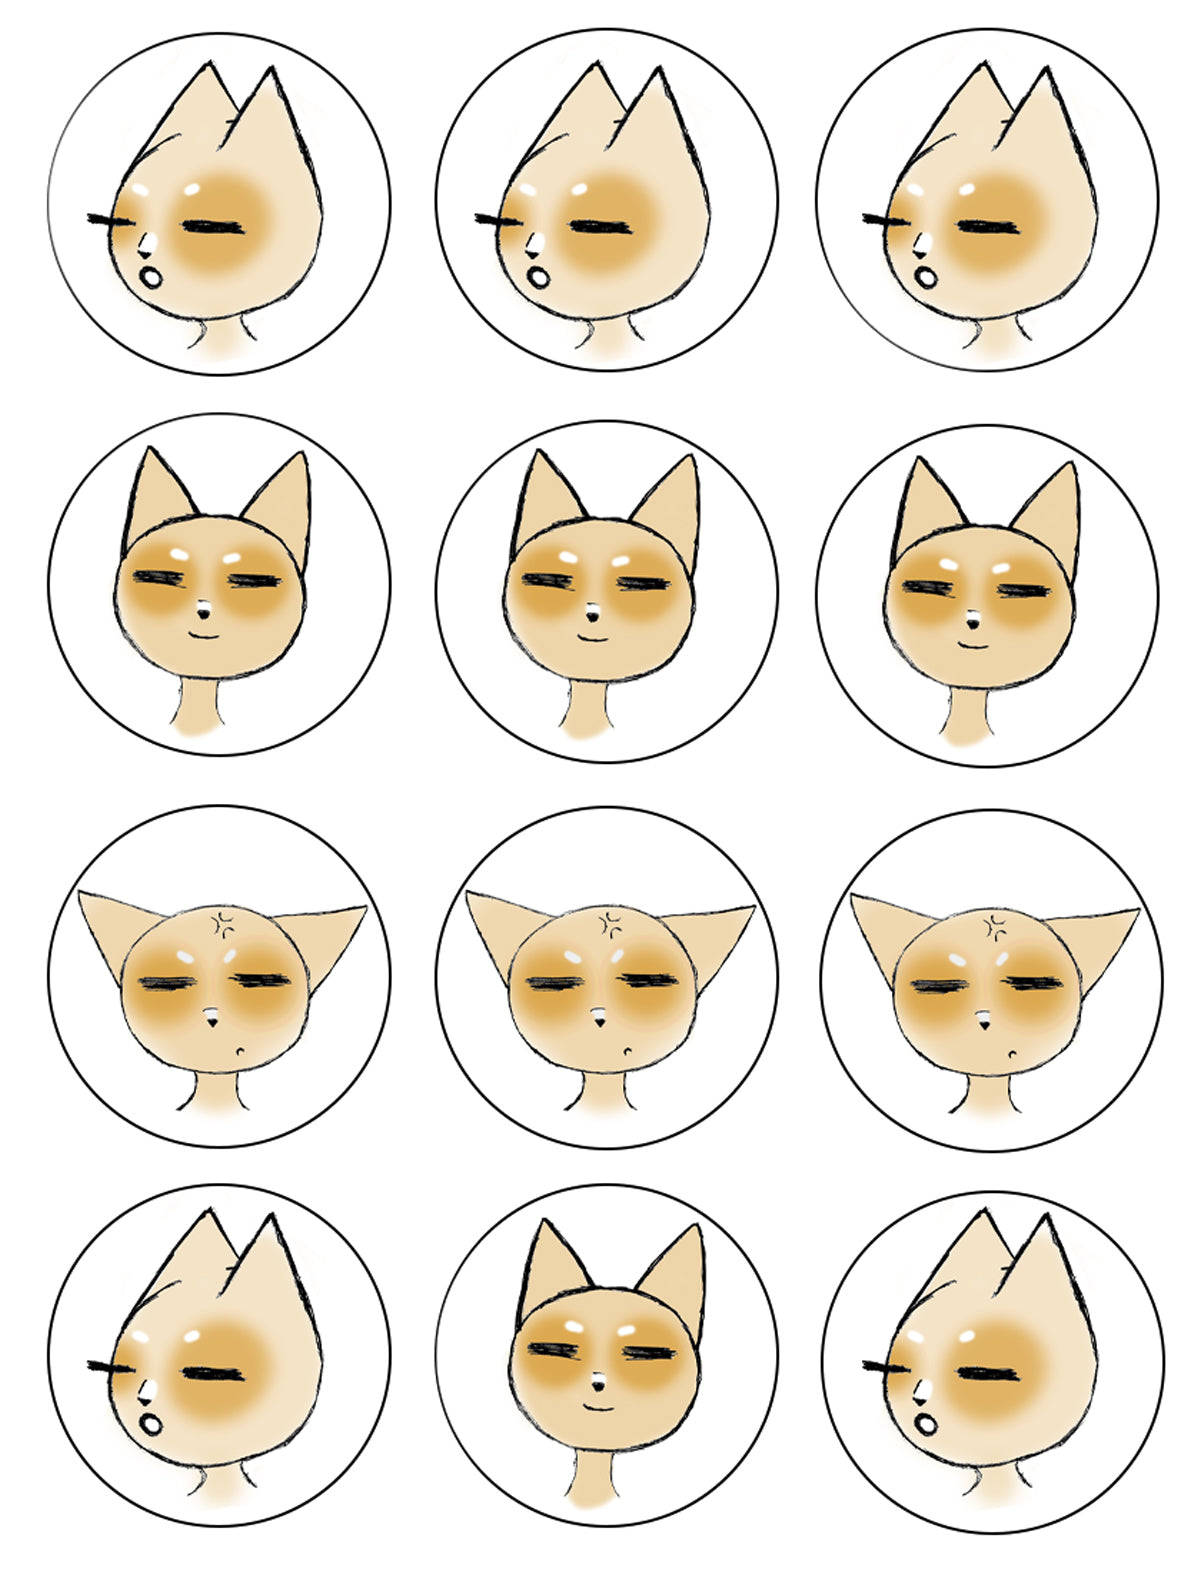 Fox Cat Anime Chibi Character Edible Cupcake Topper Images ABPID50309